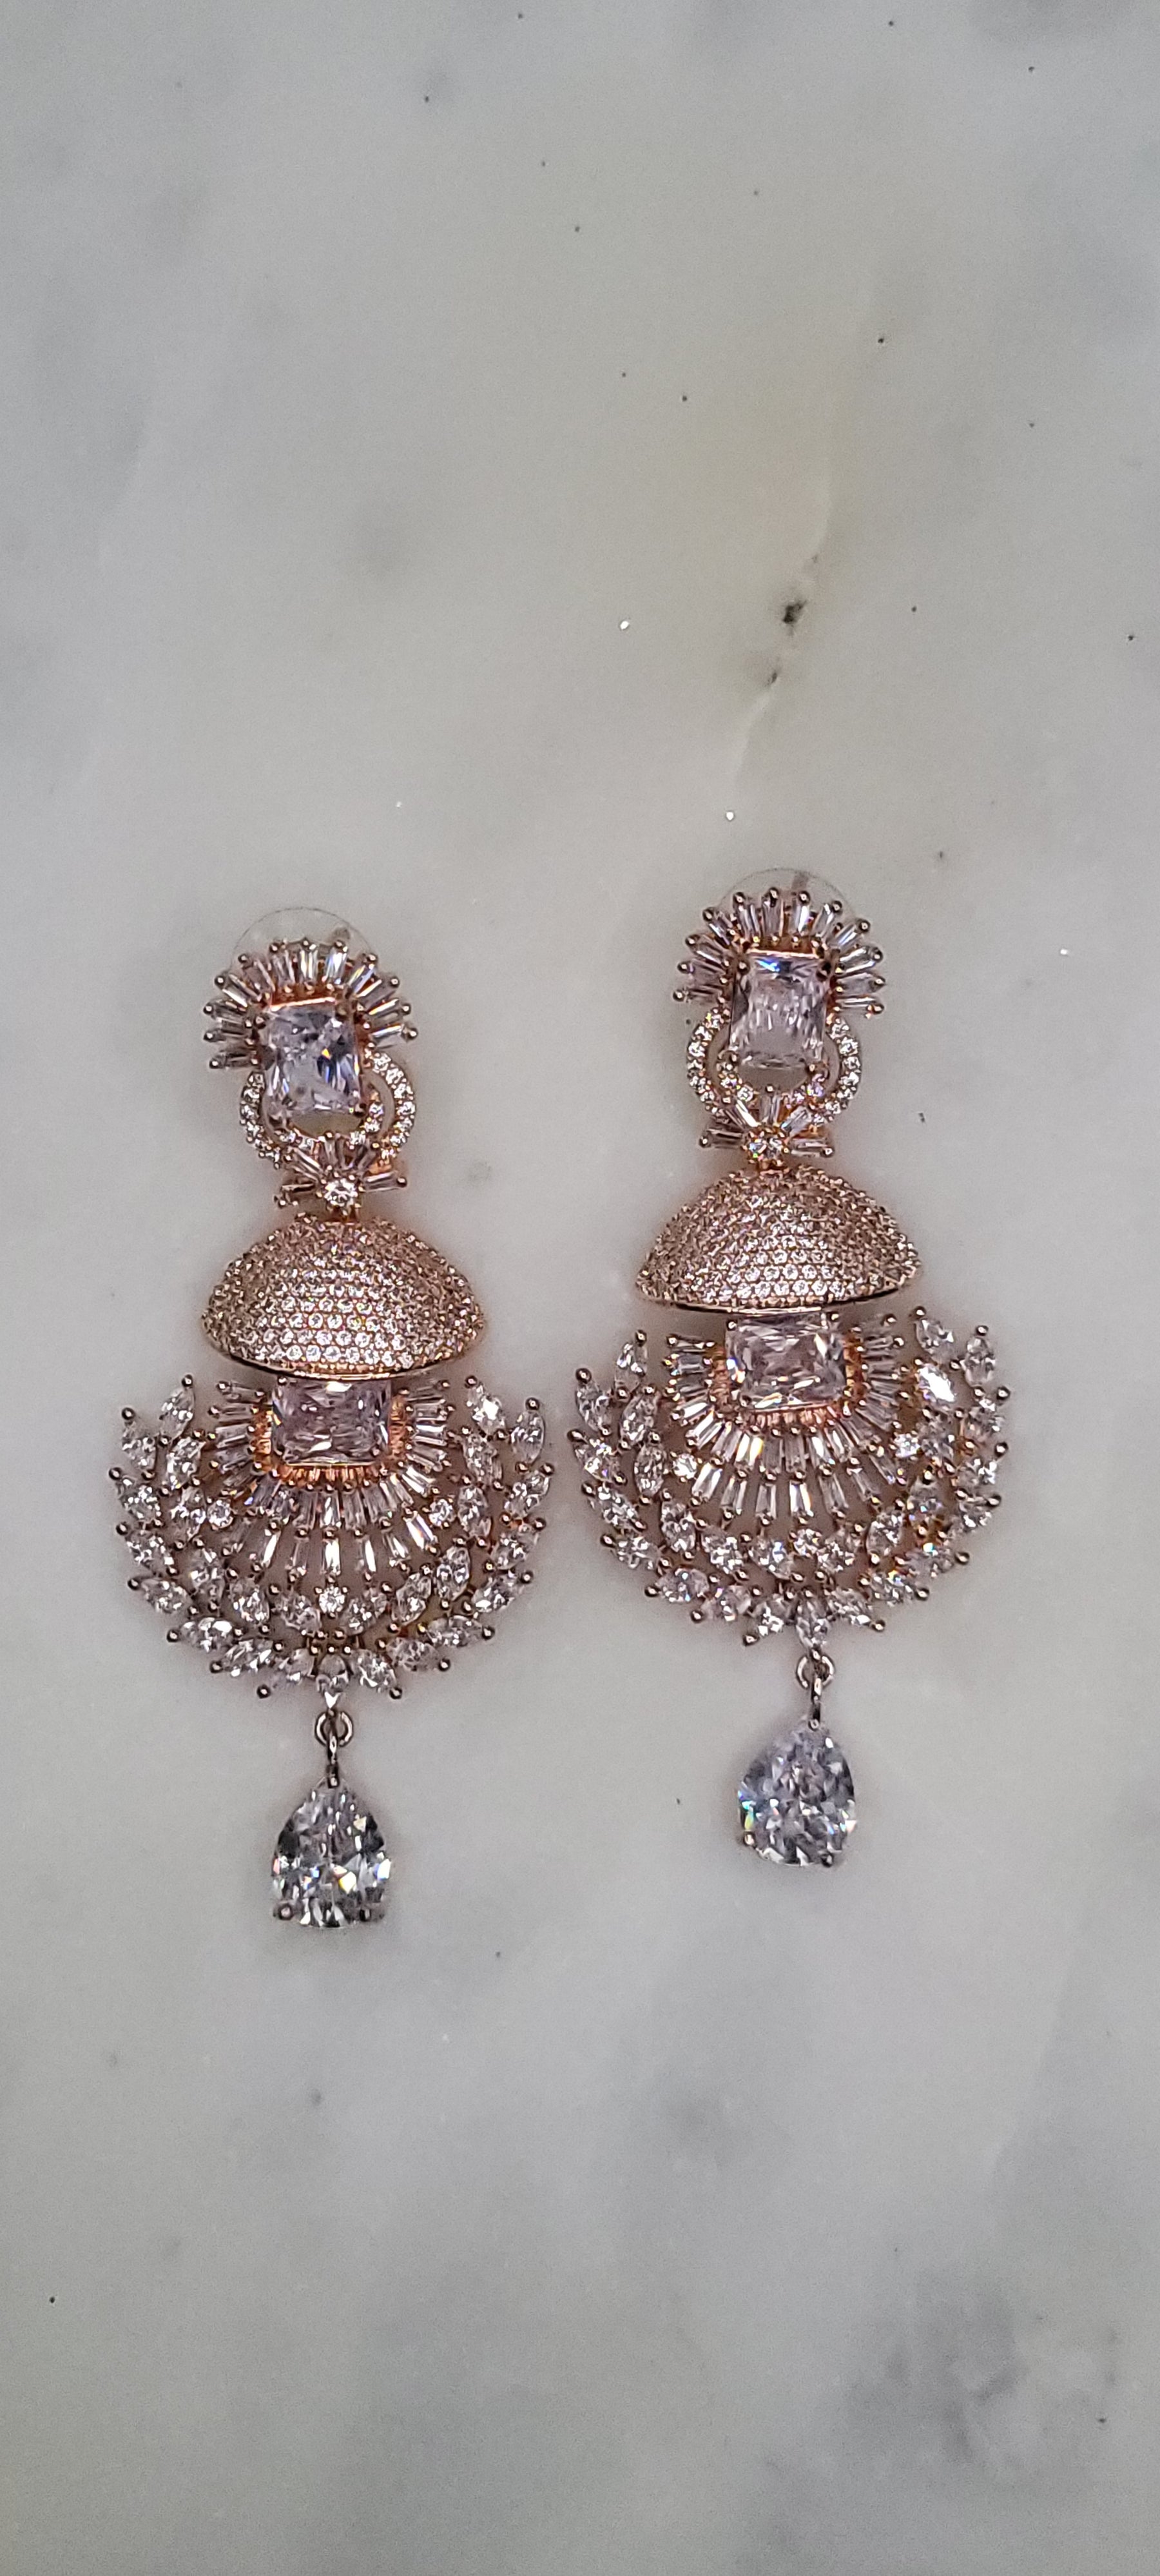 UNIQUE AND PRECIOUS ROSE GOLD DIAMOND EARRINGS